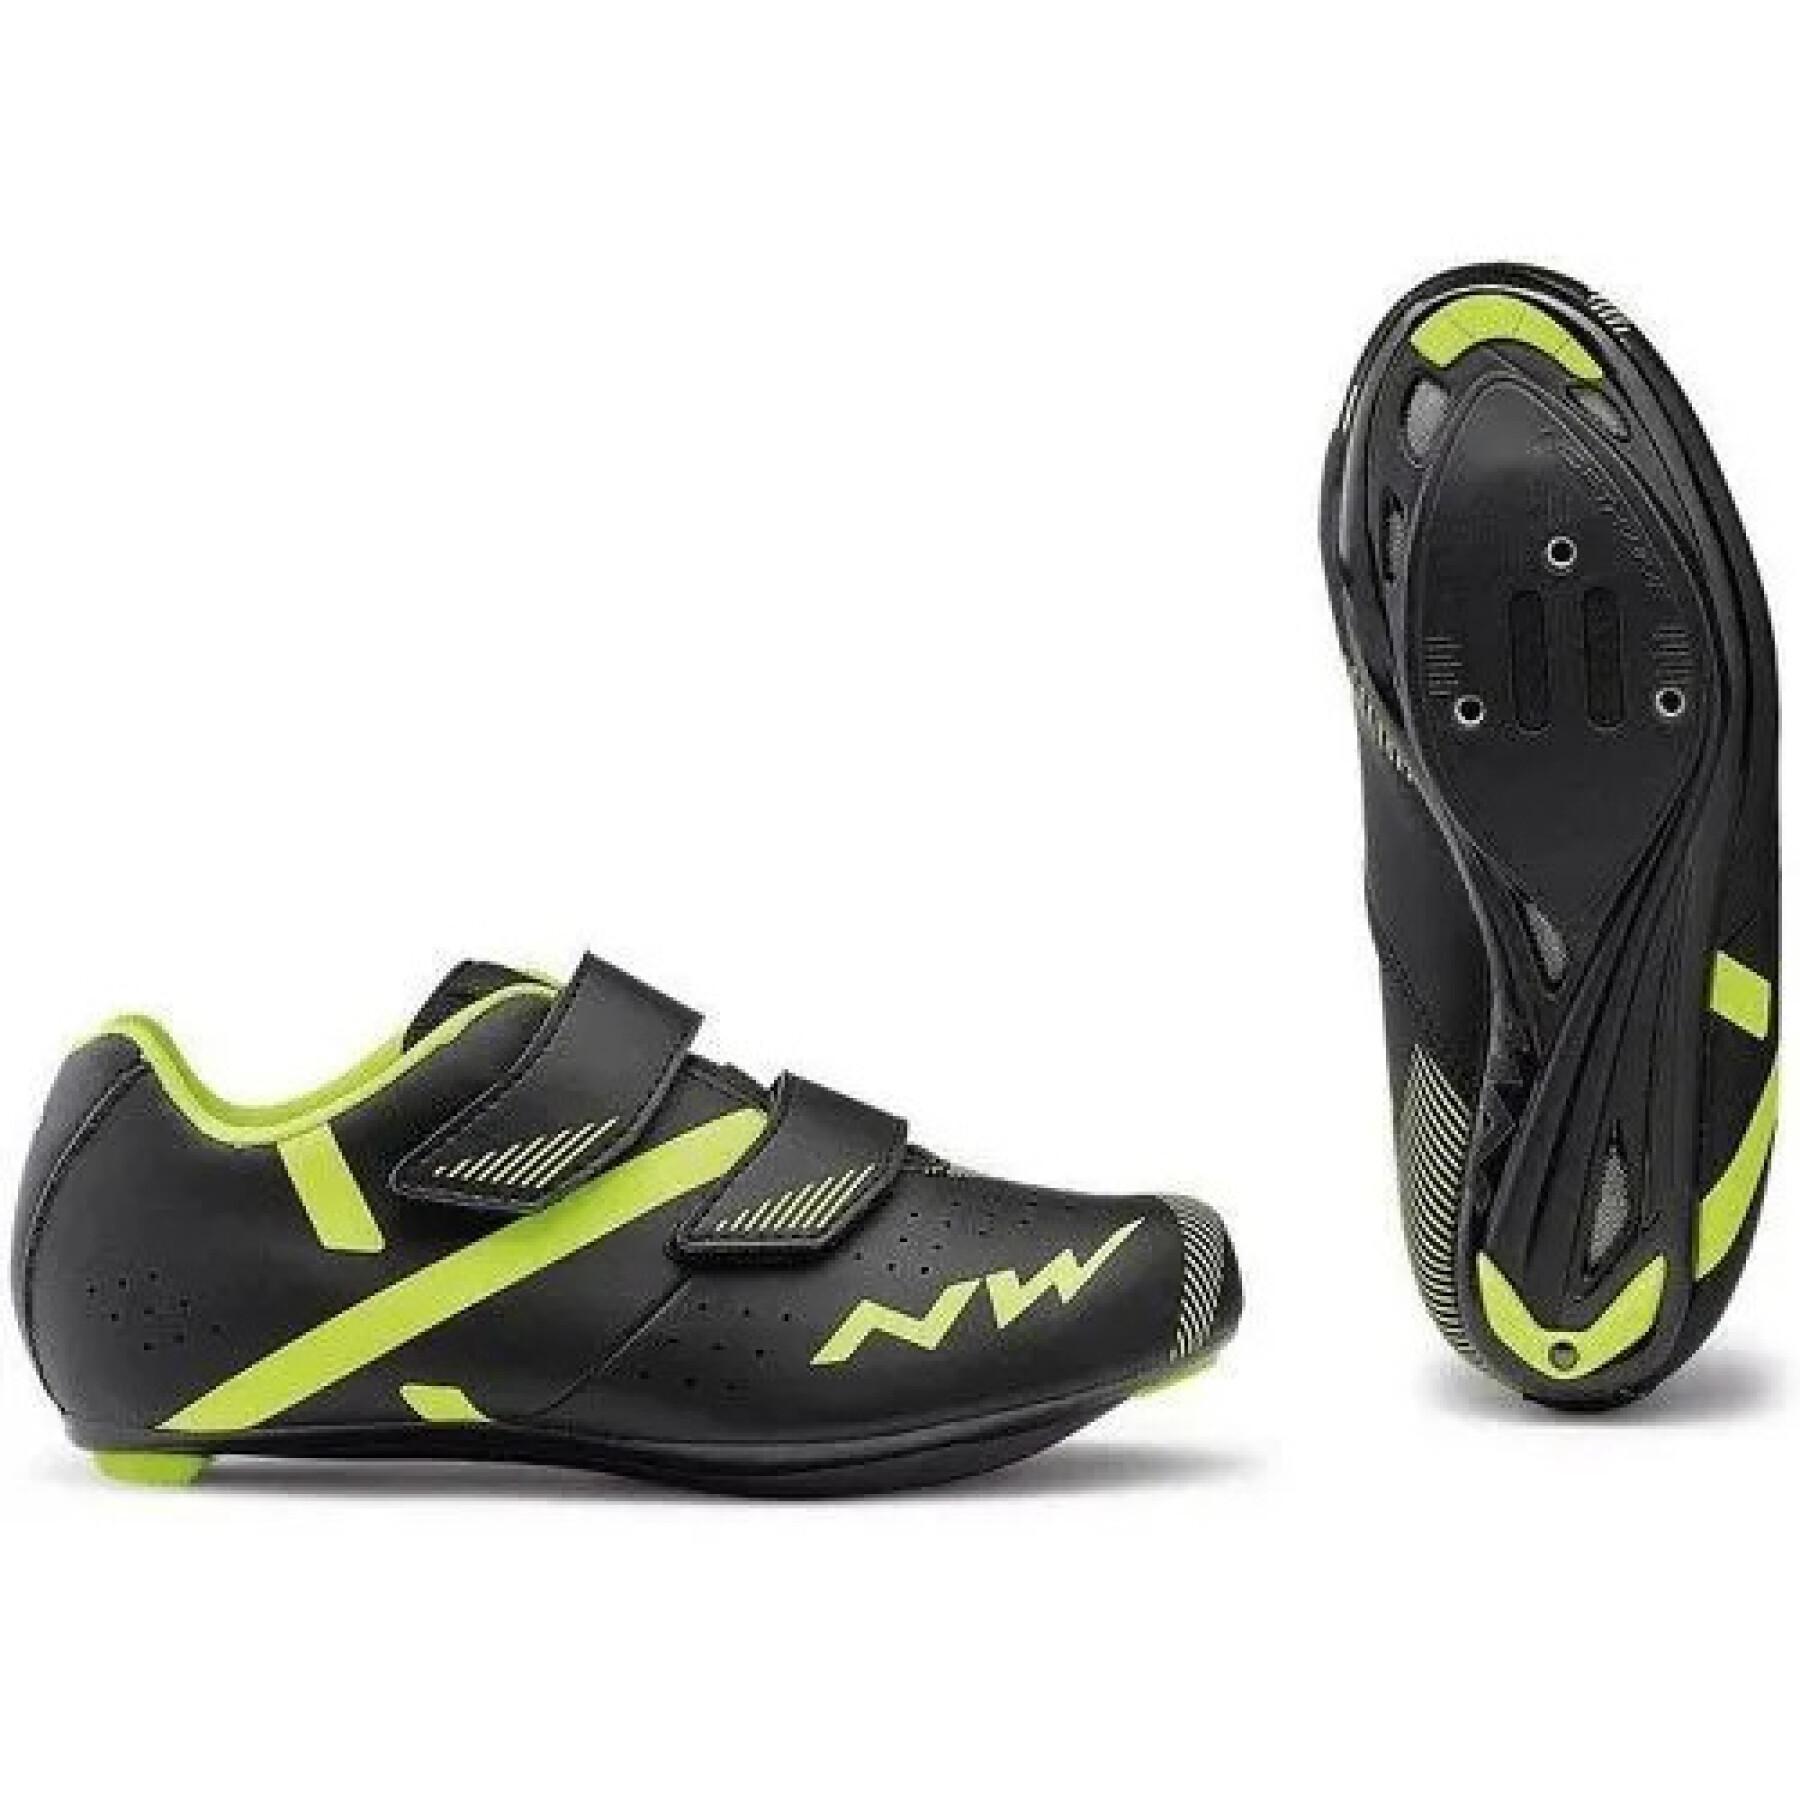 Children's cycling shoes Northwave torpedo 2